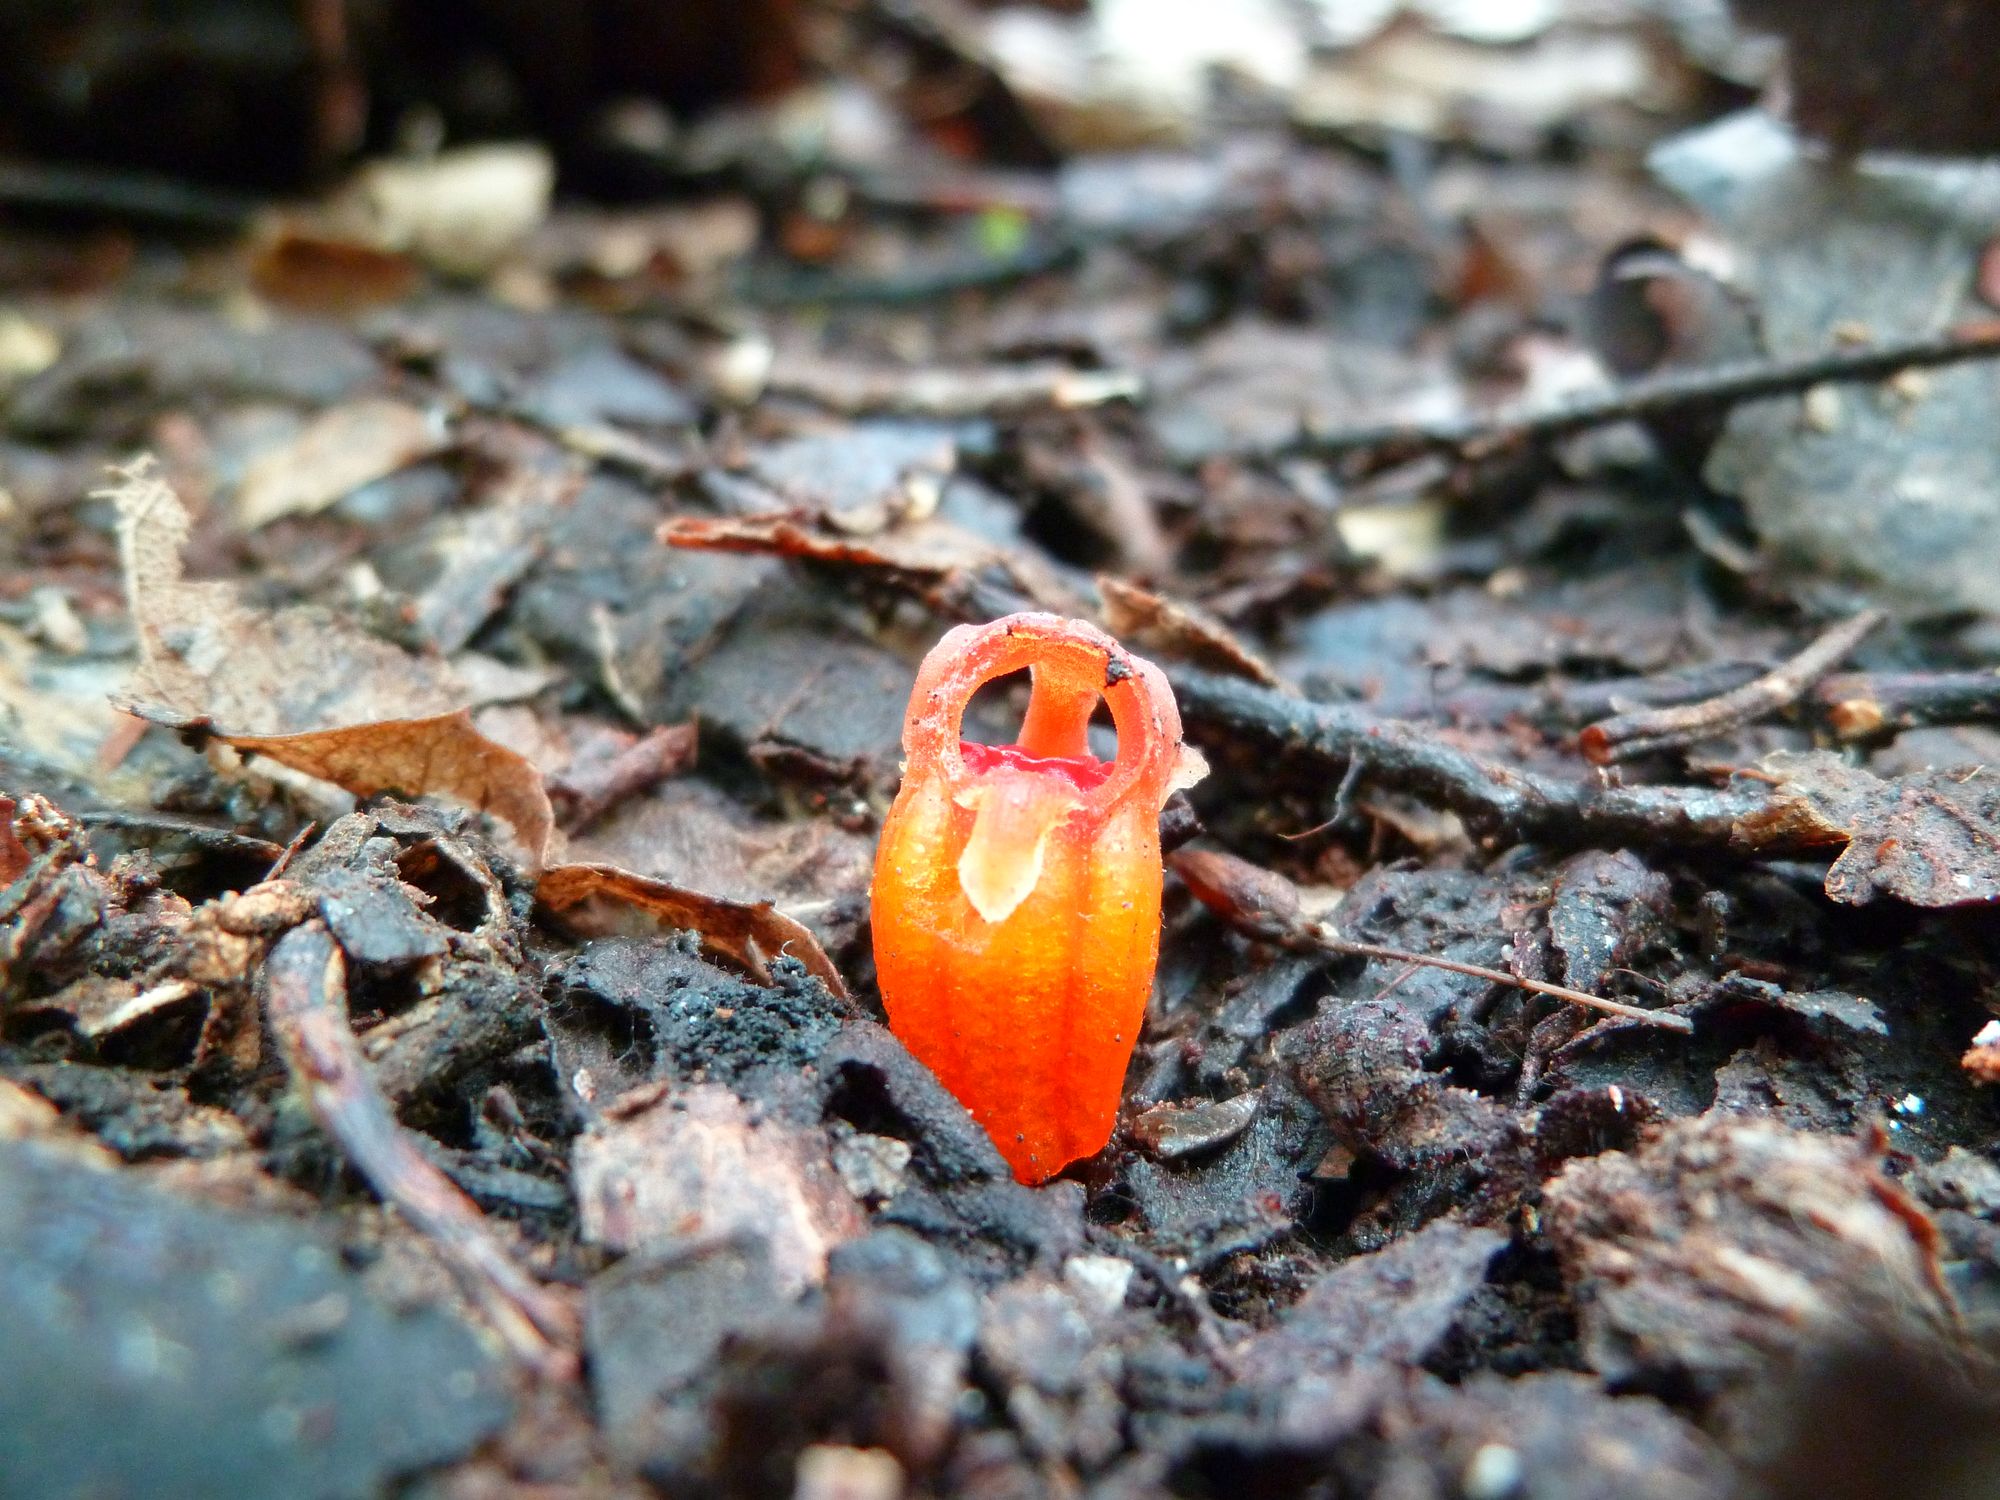 A Thismia Fairy Lantern in a pile of leaves